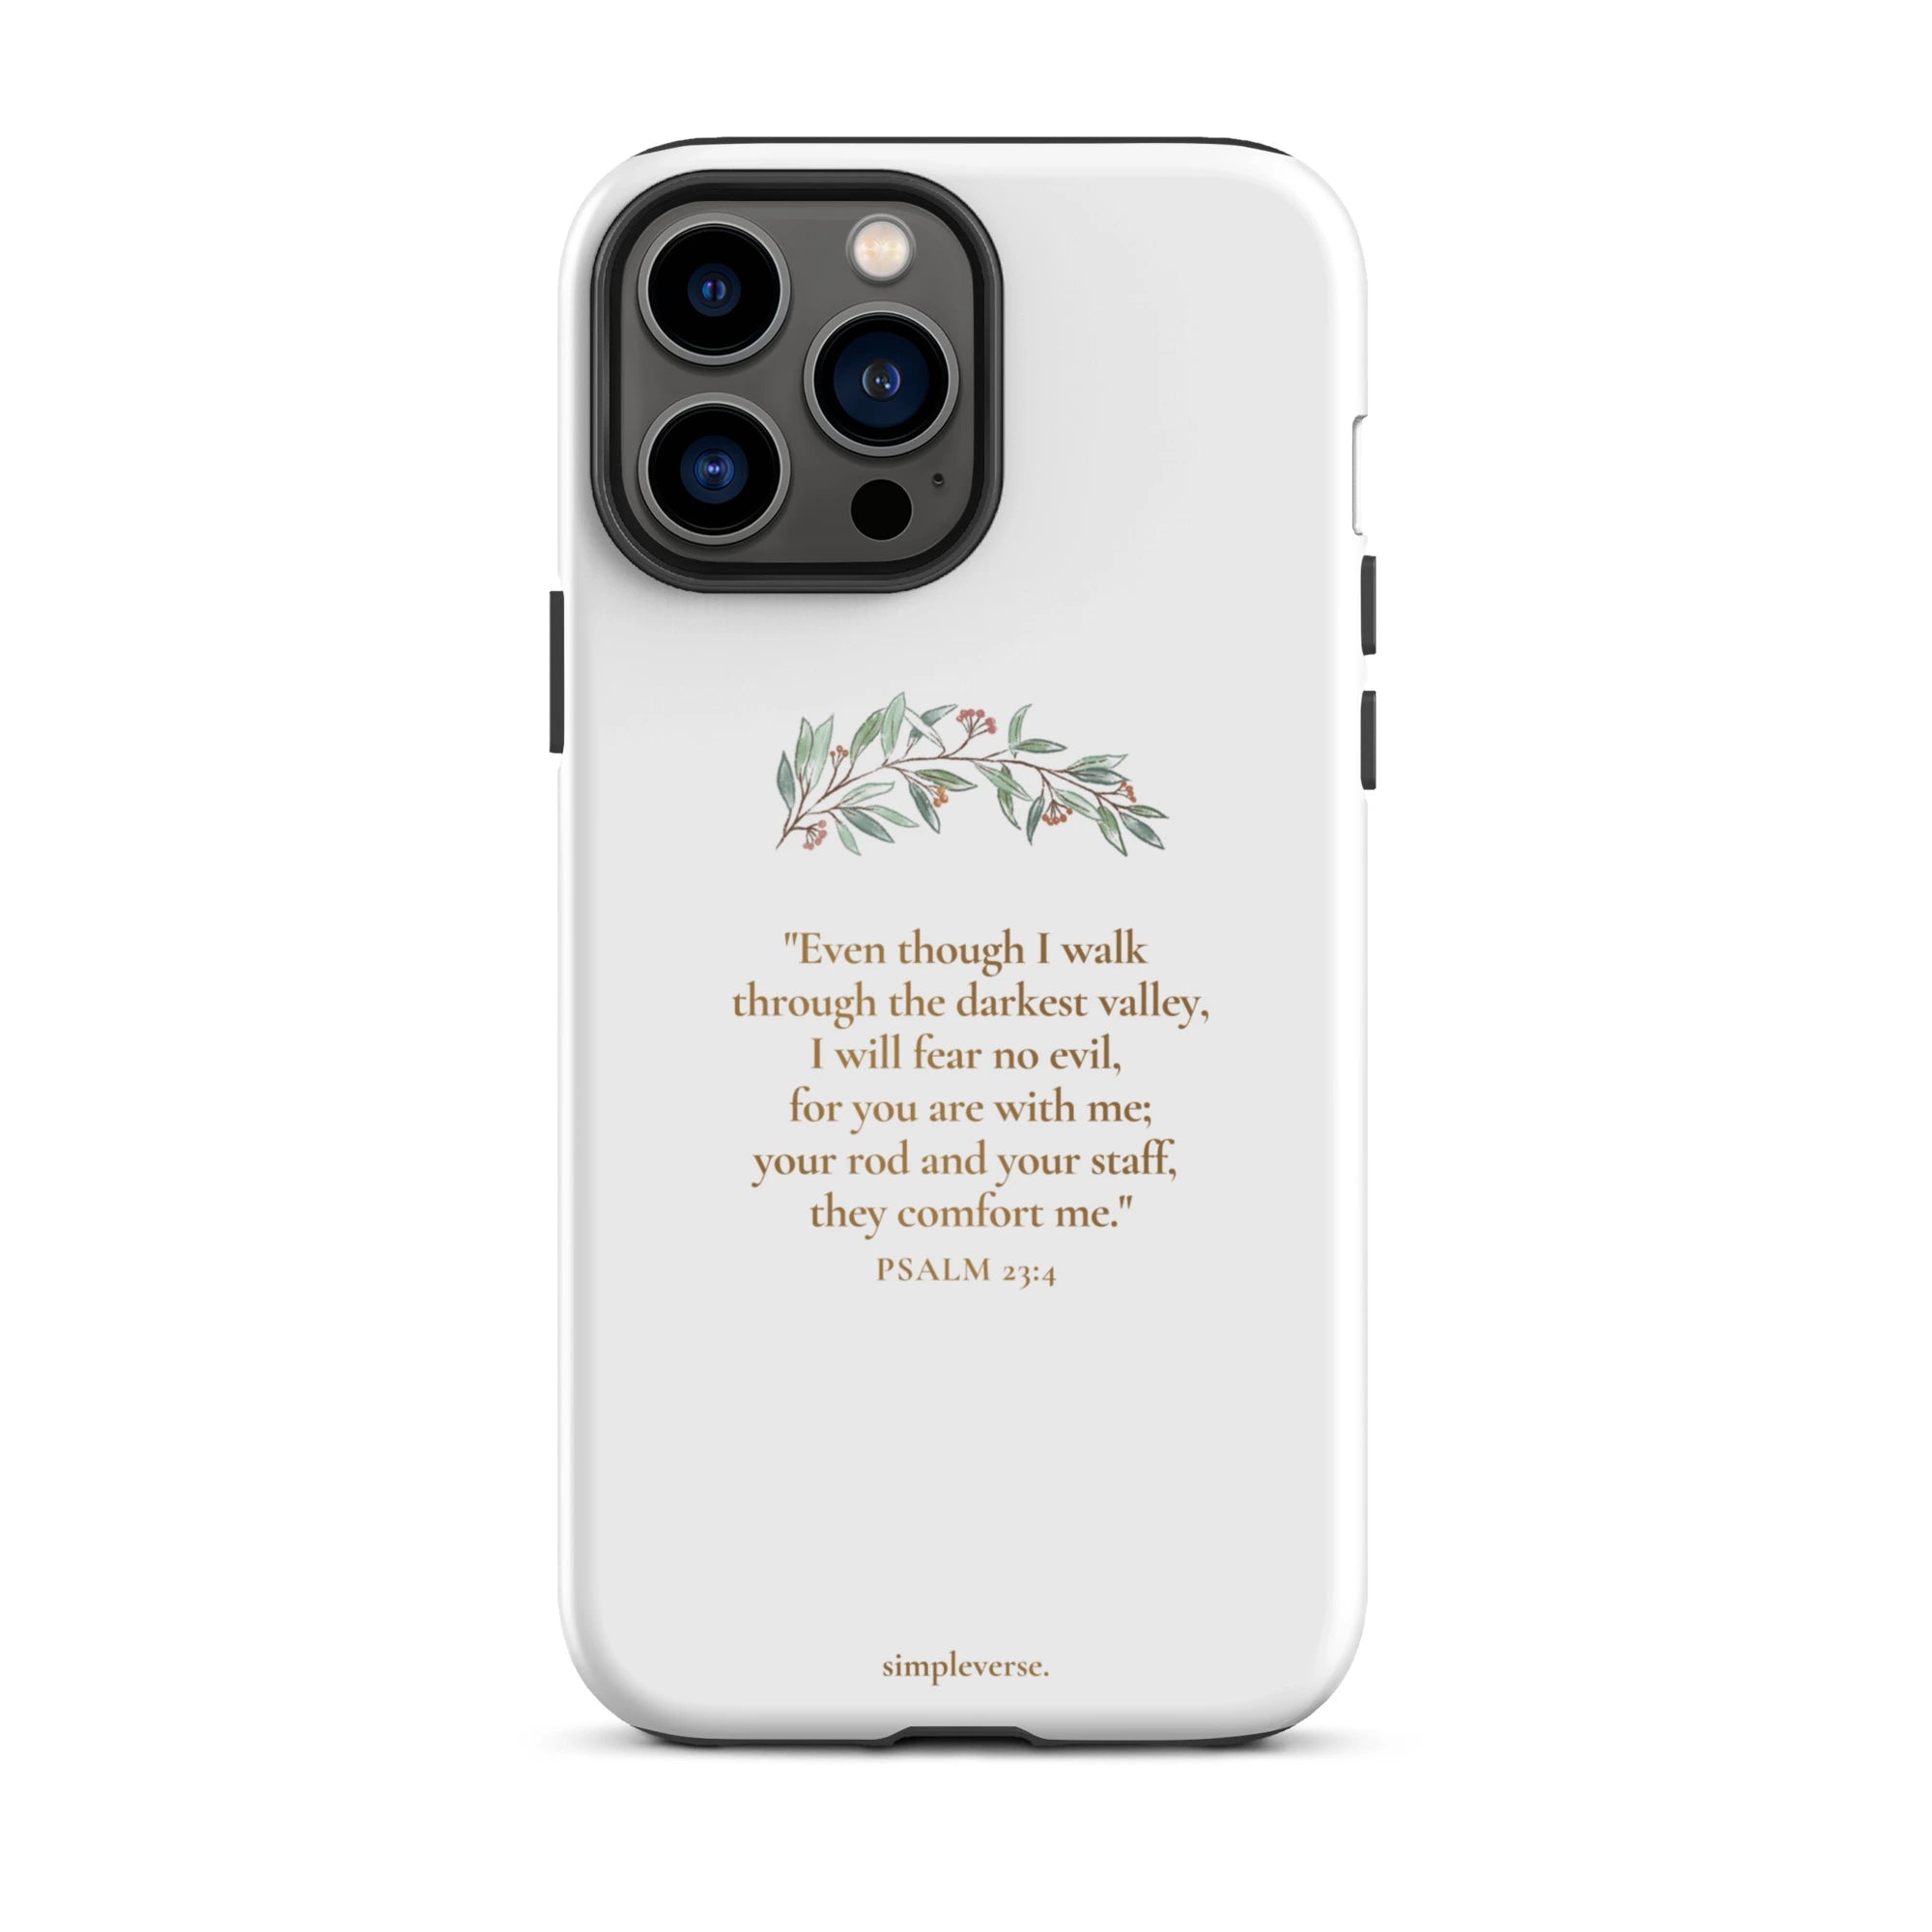 Christian iPhone case featuring Psalm 23:4 providing comfort and fearlessness in faith, with elegant florals.